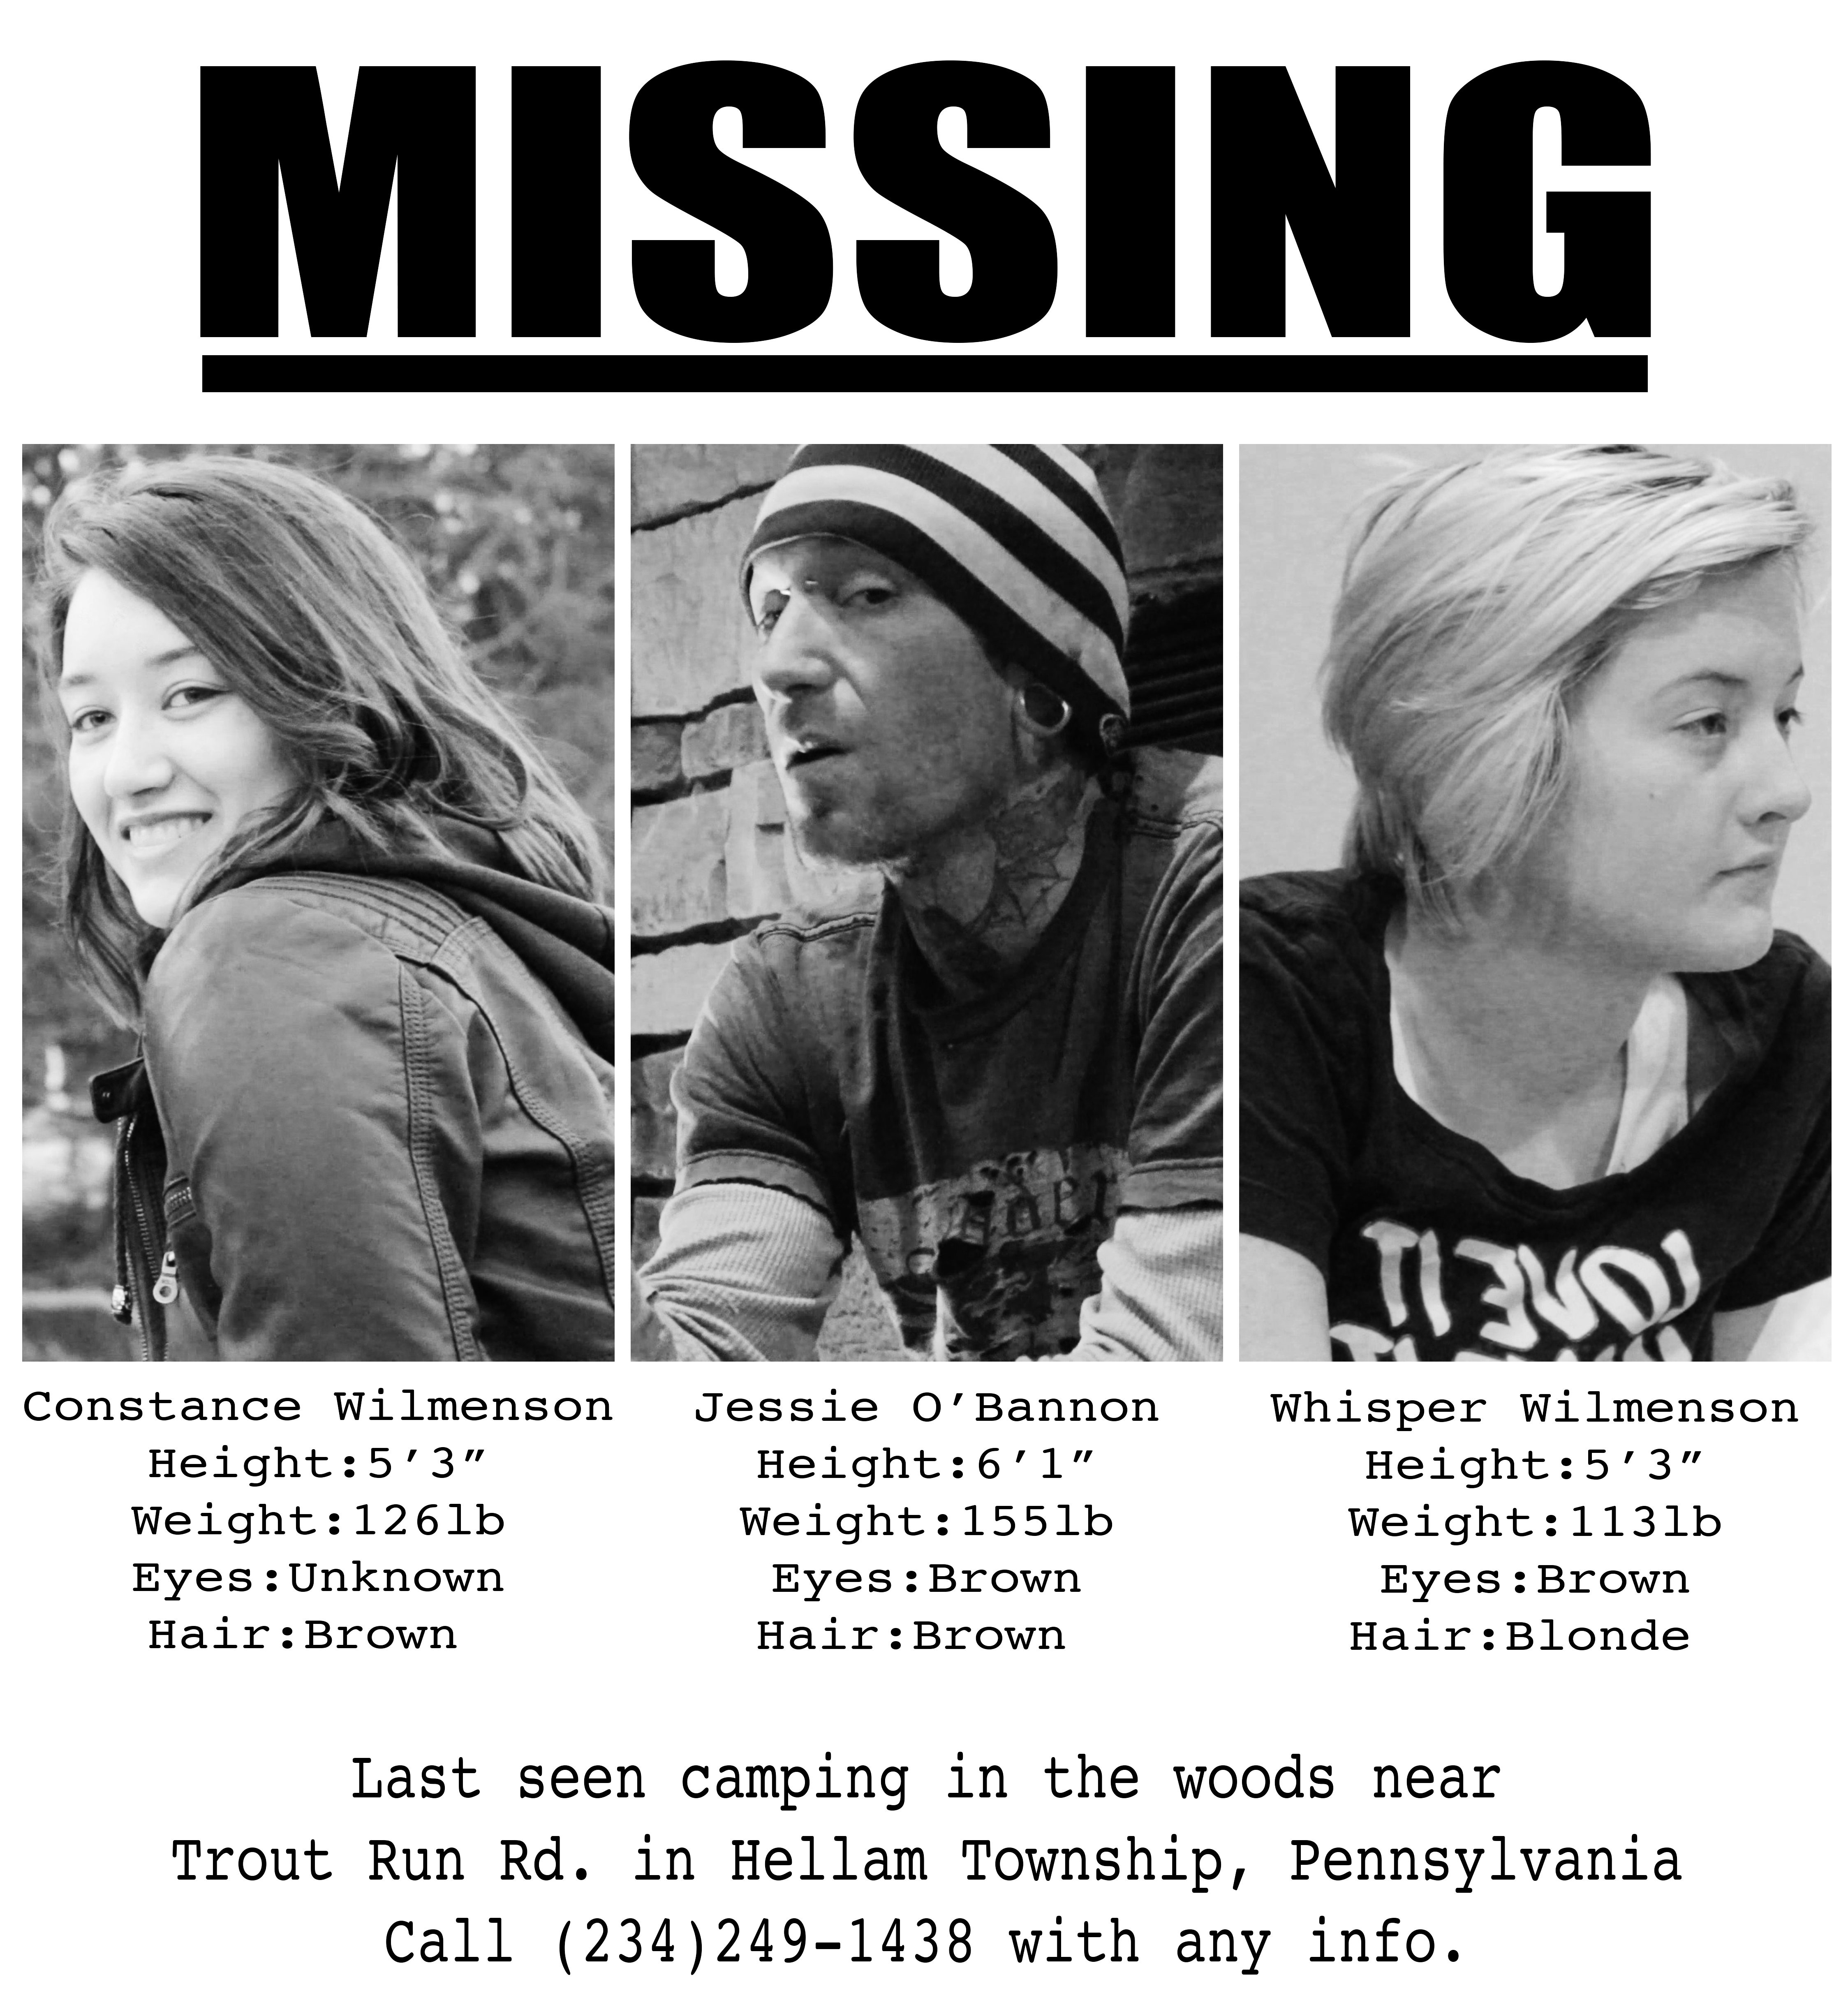 Haunted World of CW (2013) - Missing Person Poster